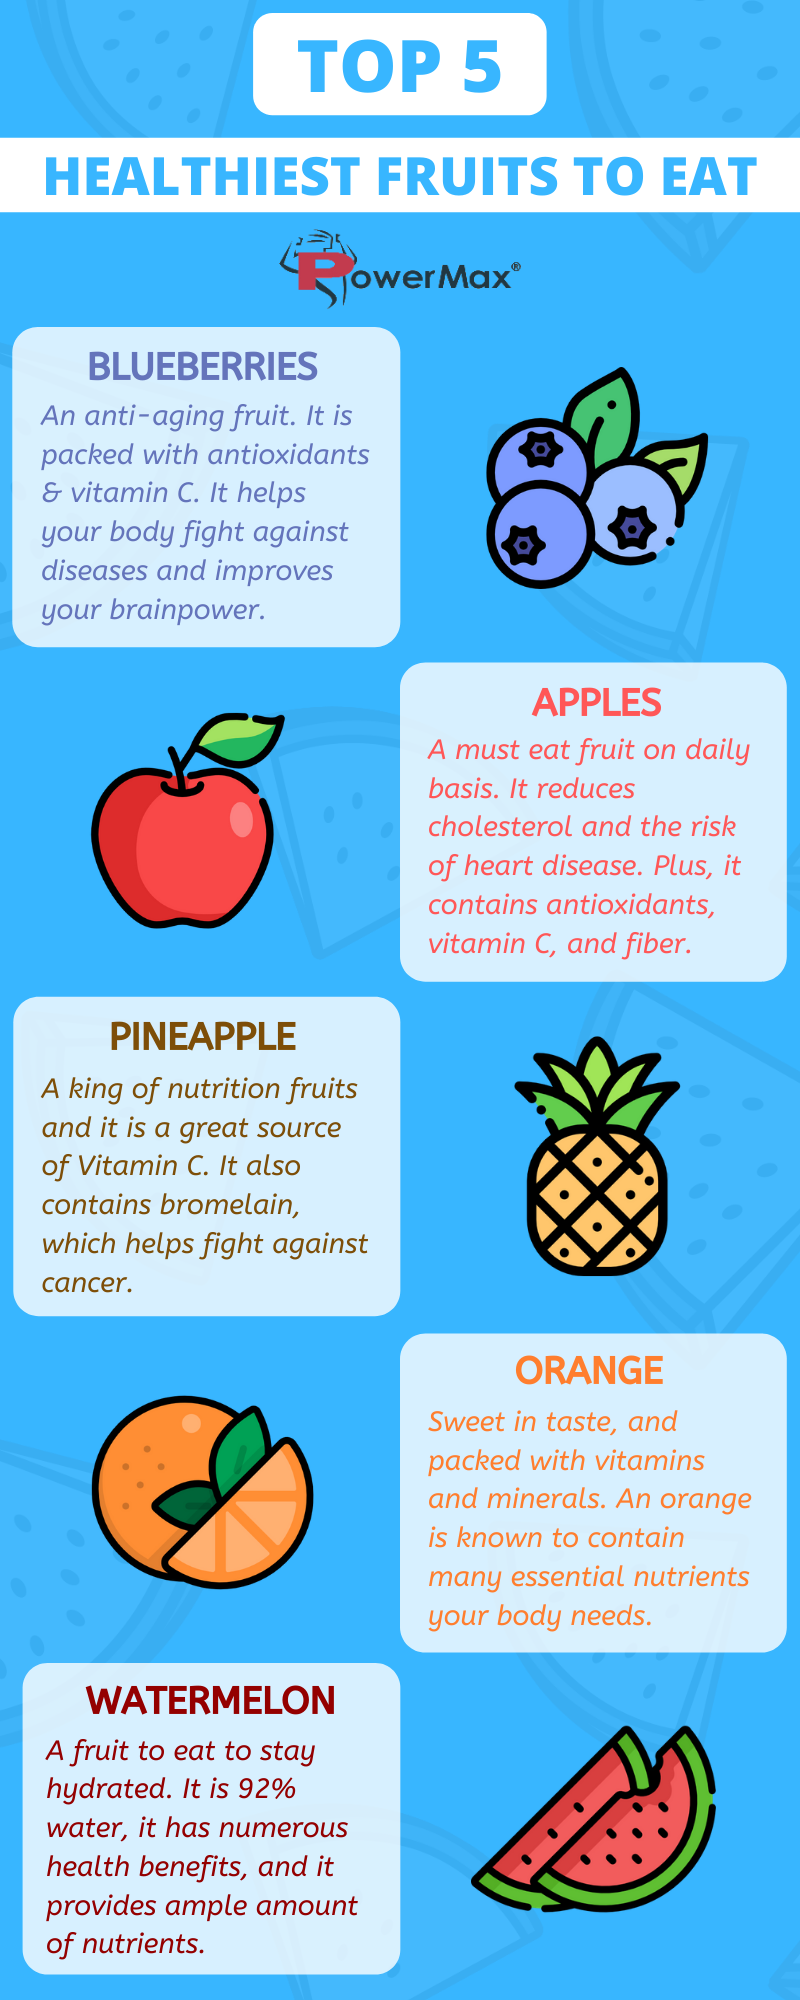 What Are Top 5 Healthiest Fruits To Eat? | by POWERMAXFITNESS | Medium